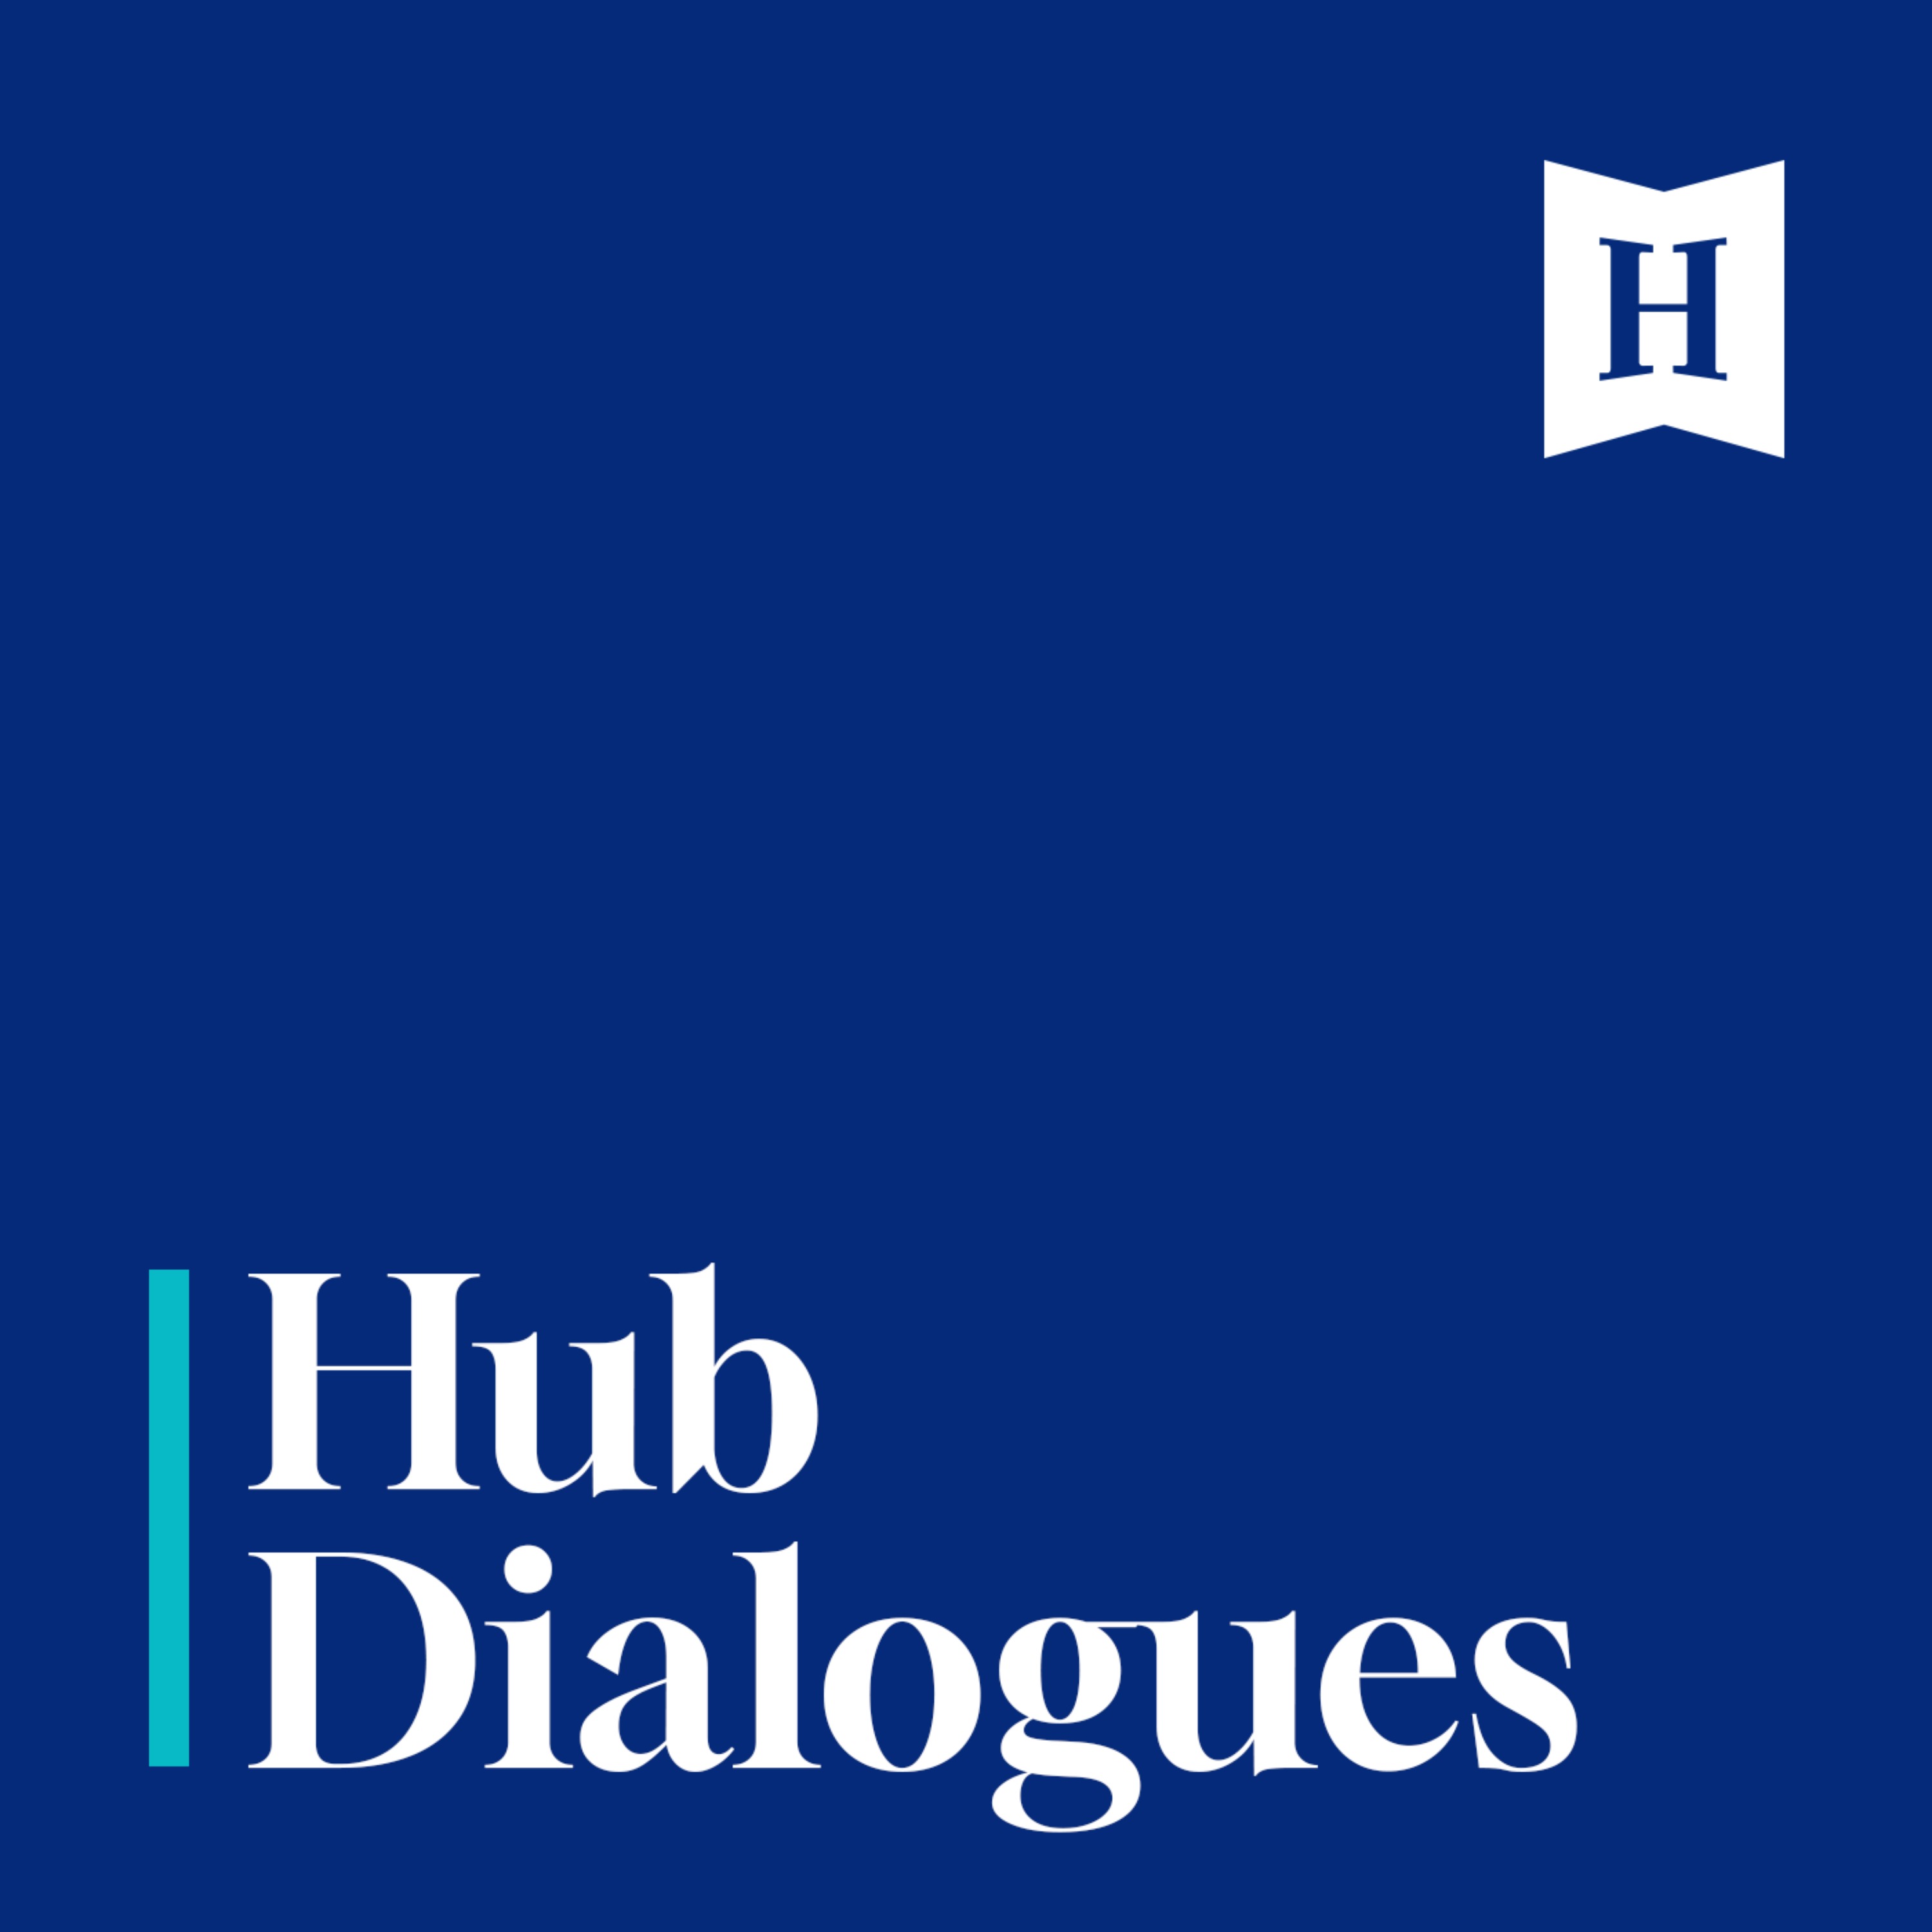 Hub Dialogues: Greg Lukianoff on cancel culture, its threat to democracy and reclaiming a free speech culture